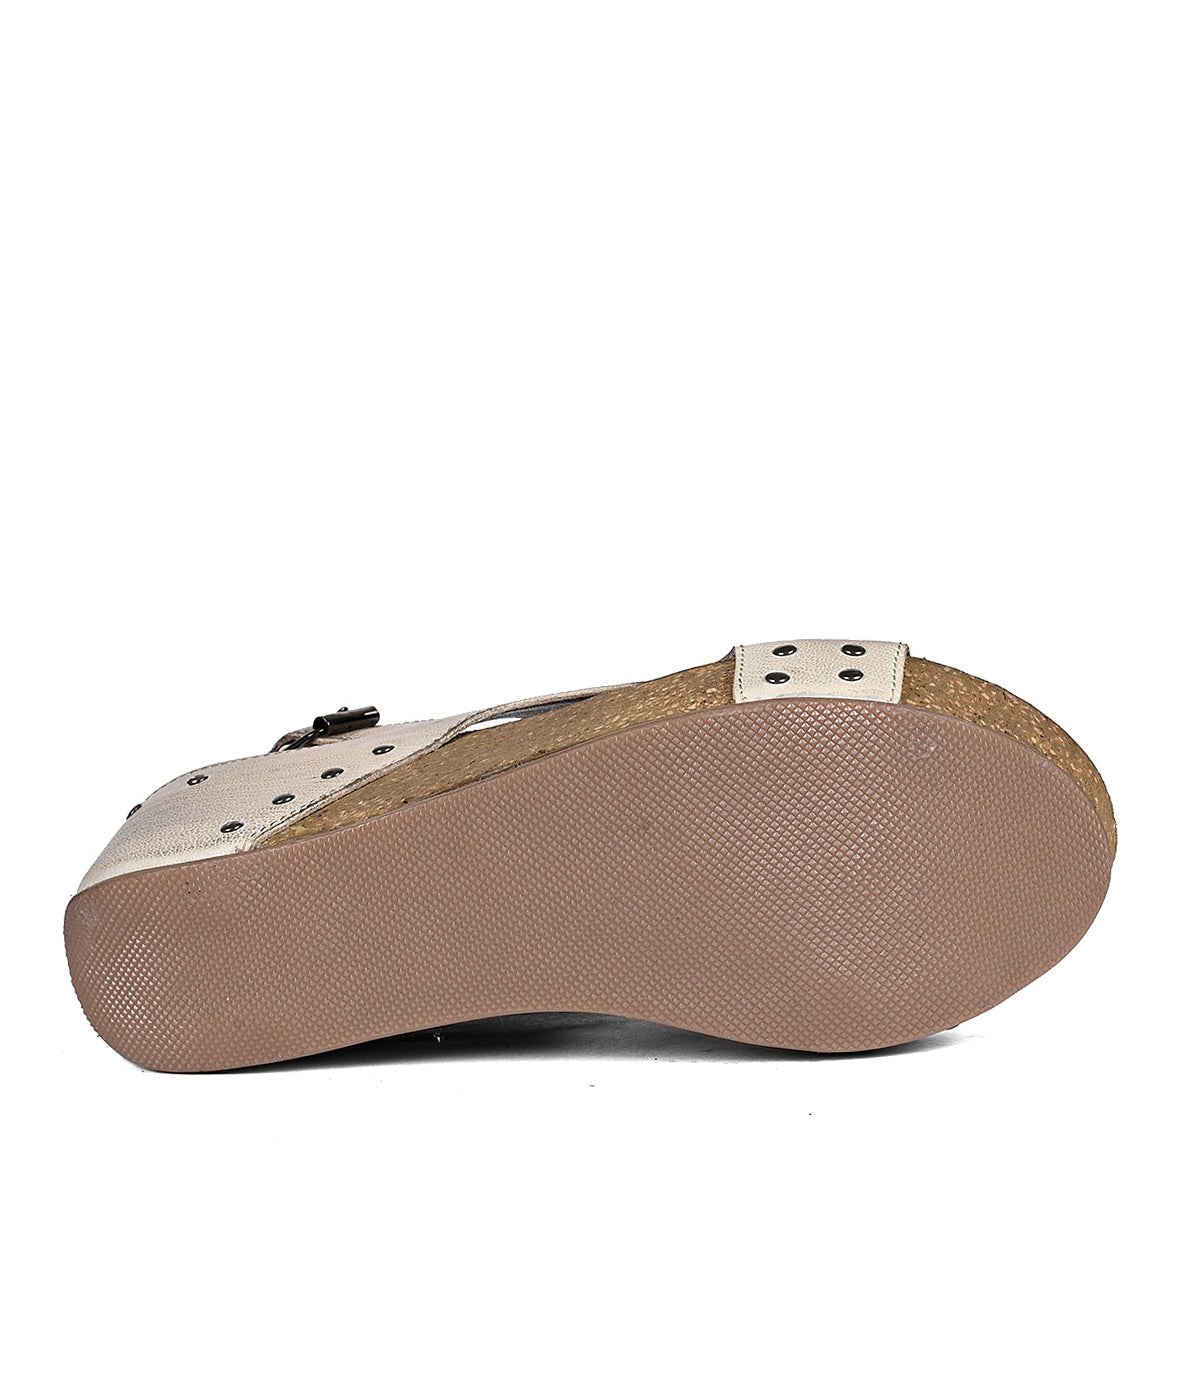 
                  
                    A single brown orthopedic shoe with adjustable straps and a full-grain leather upper, displayed on a white background.
                  
                